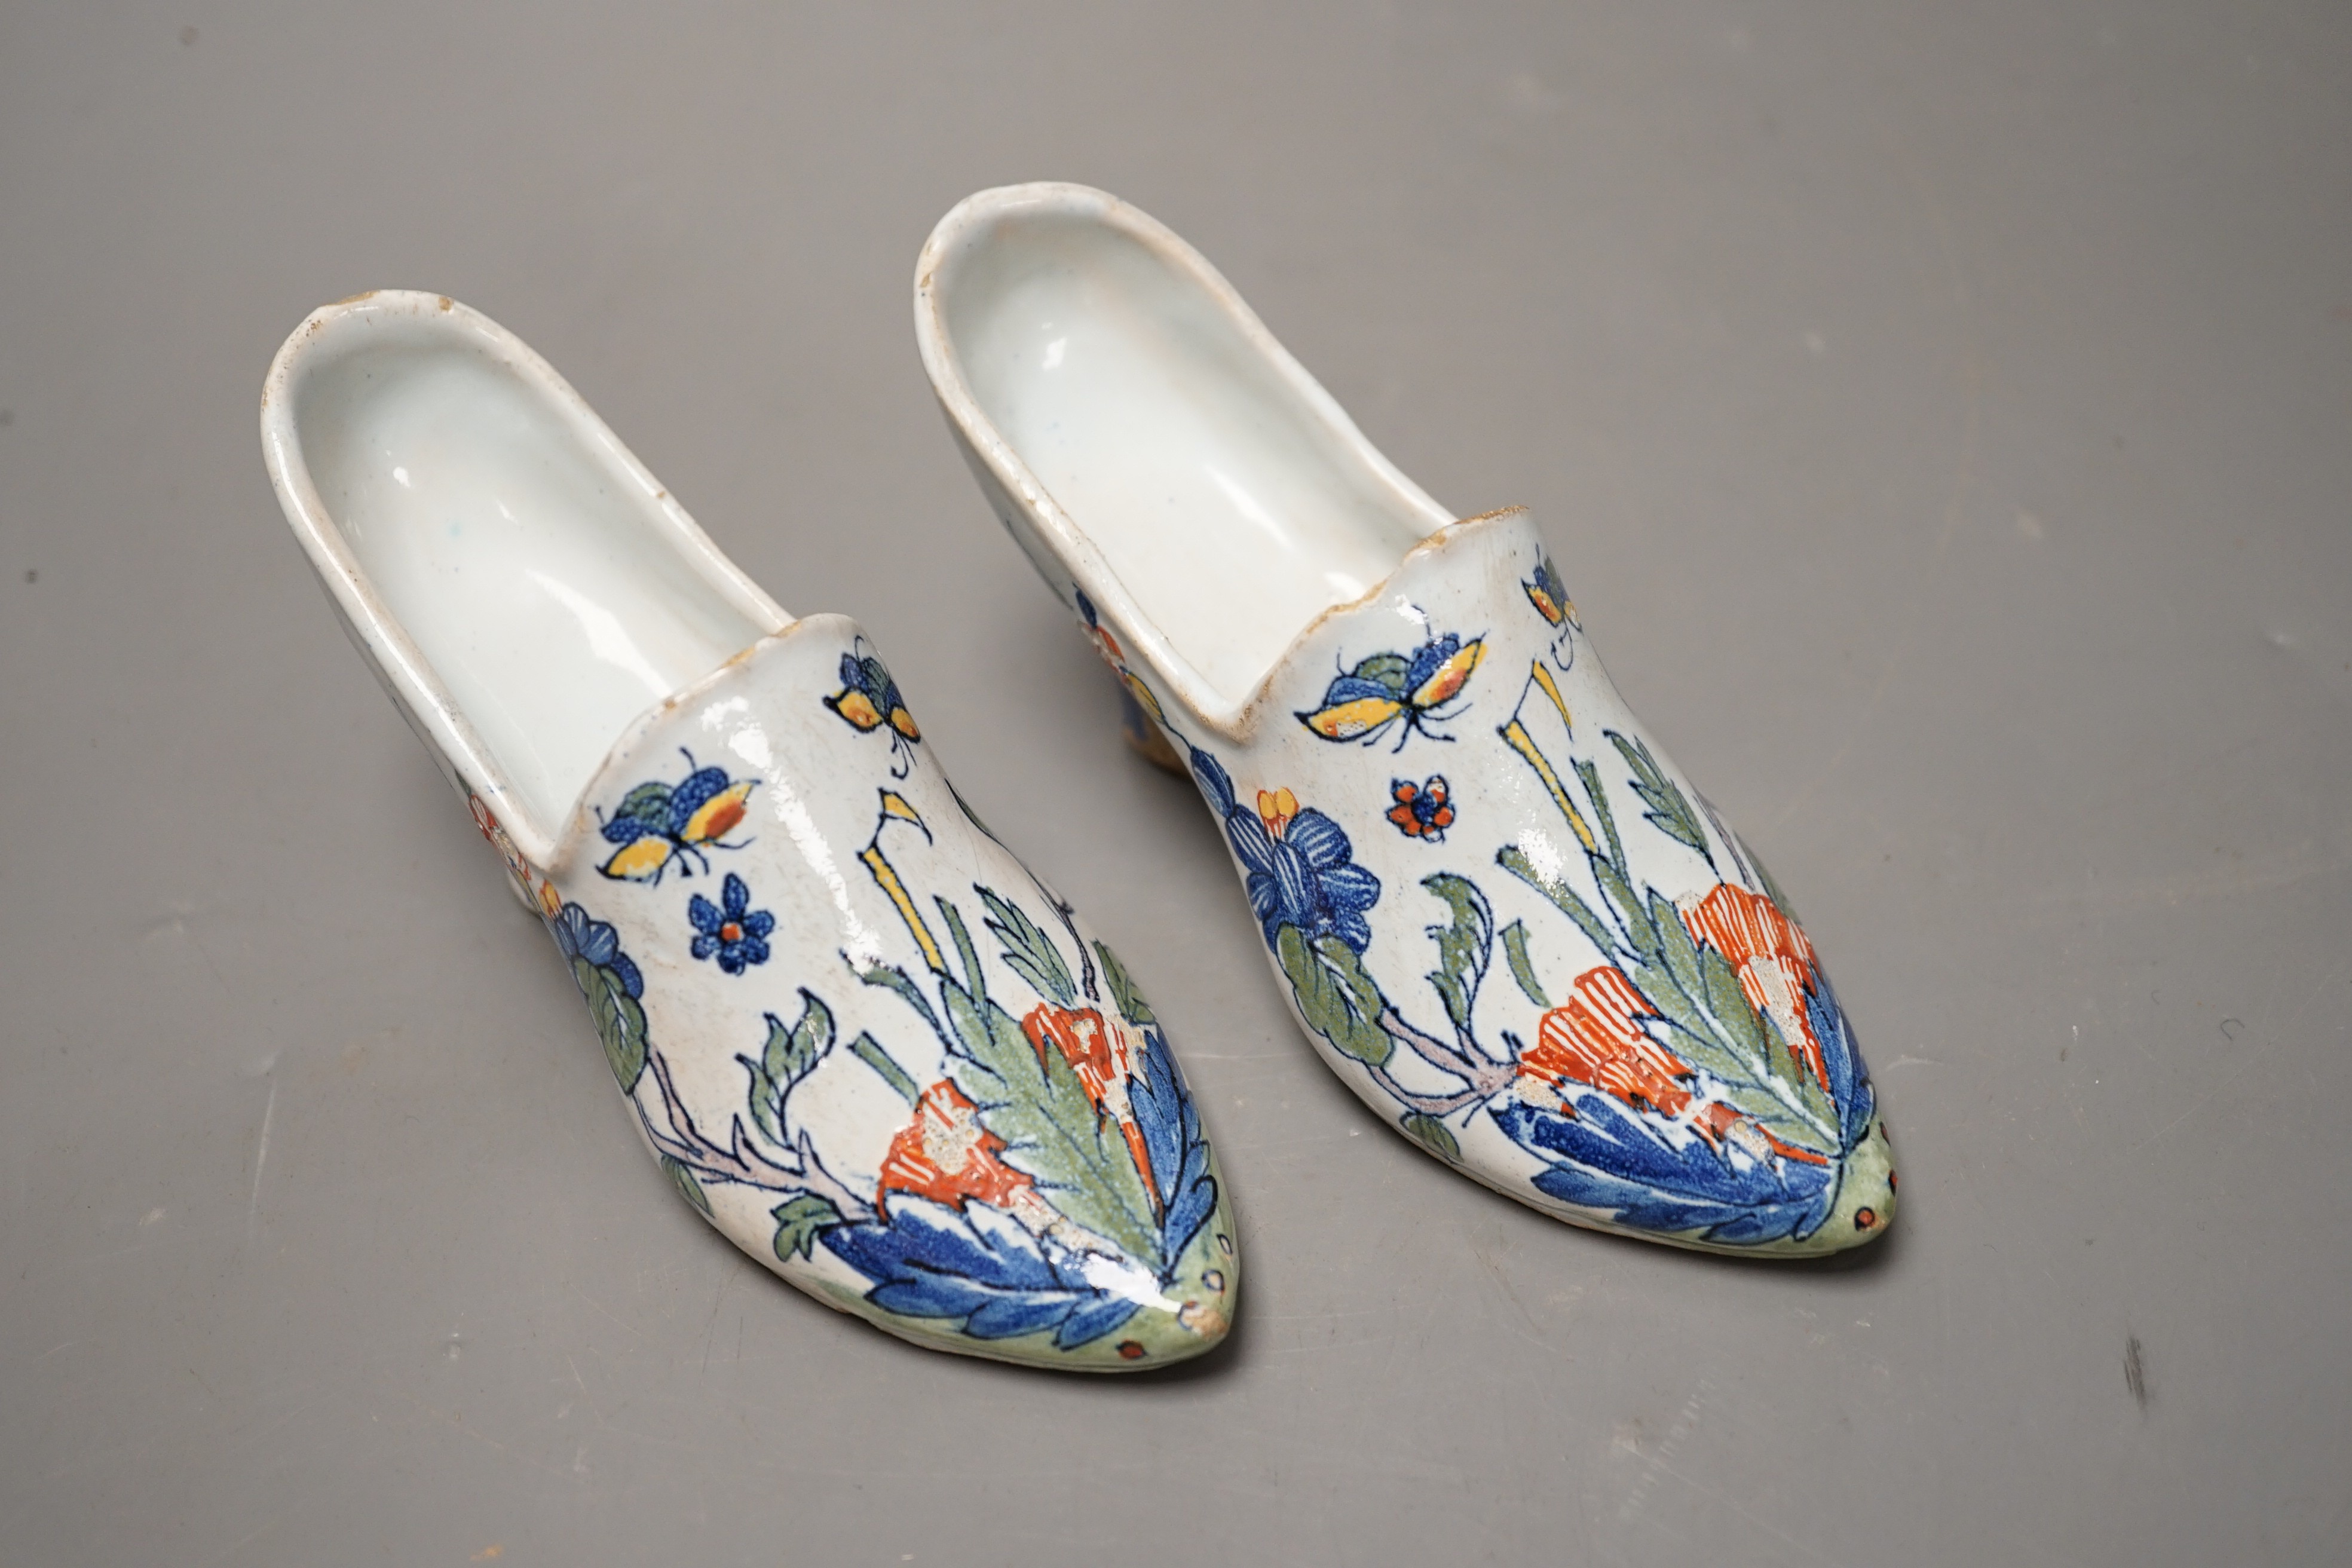 A pair of 19th century Delft polychrome models of shoes, 14cms wide